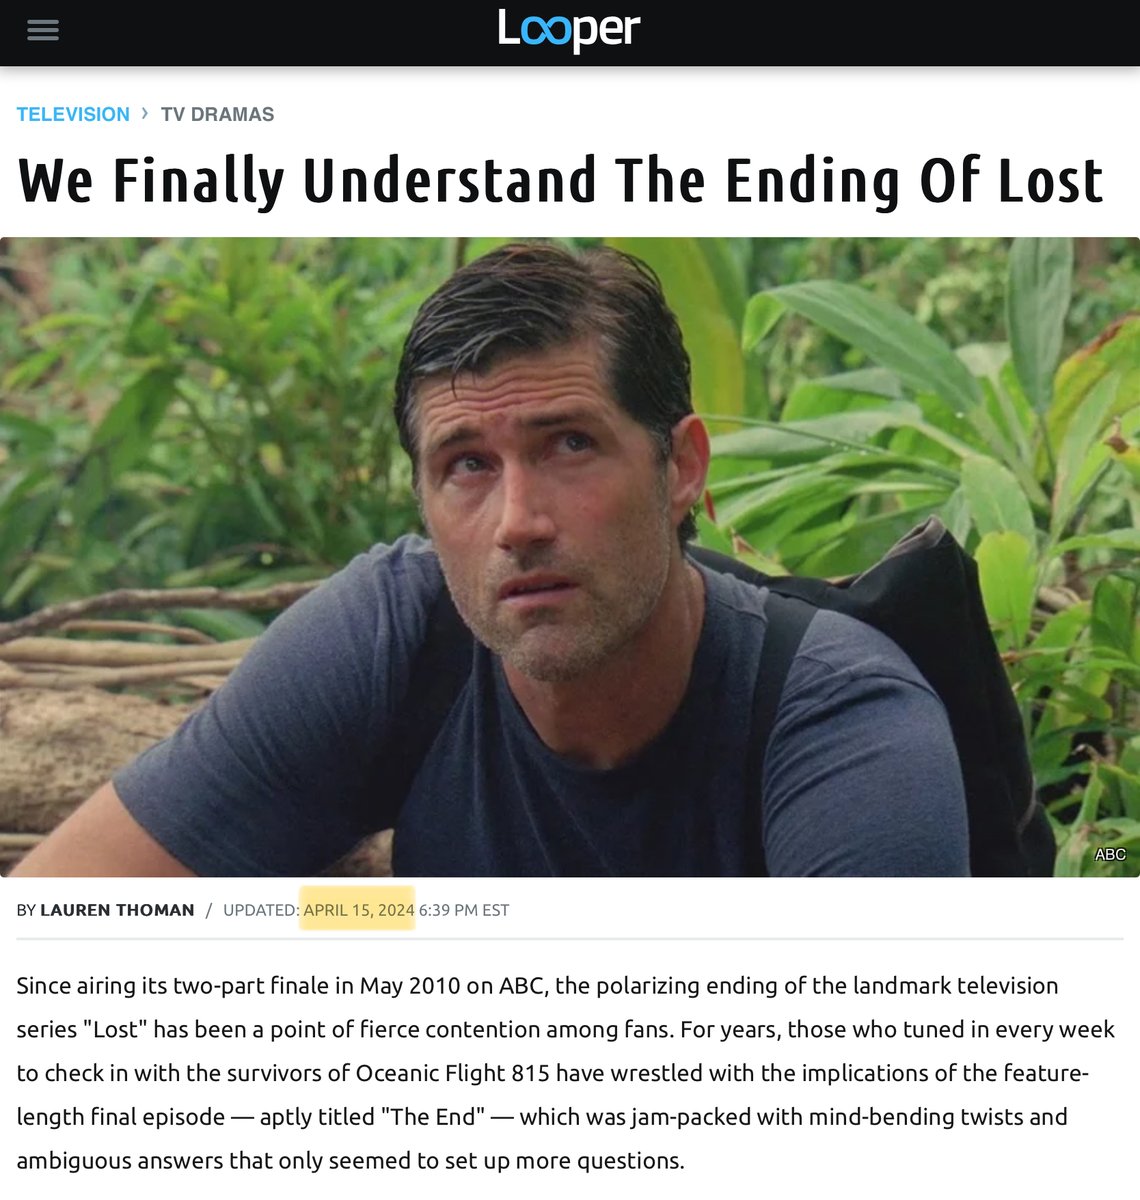 For 14 years, #Looper thought Christian saying 'Everything that’s ever happened to you is real' means 'They were dead the entire time.' 

Until today. 🤦🏻‍♂️Better late than never I suppose. #LOST